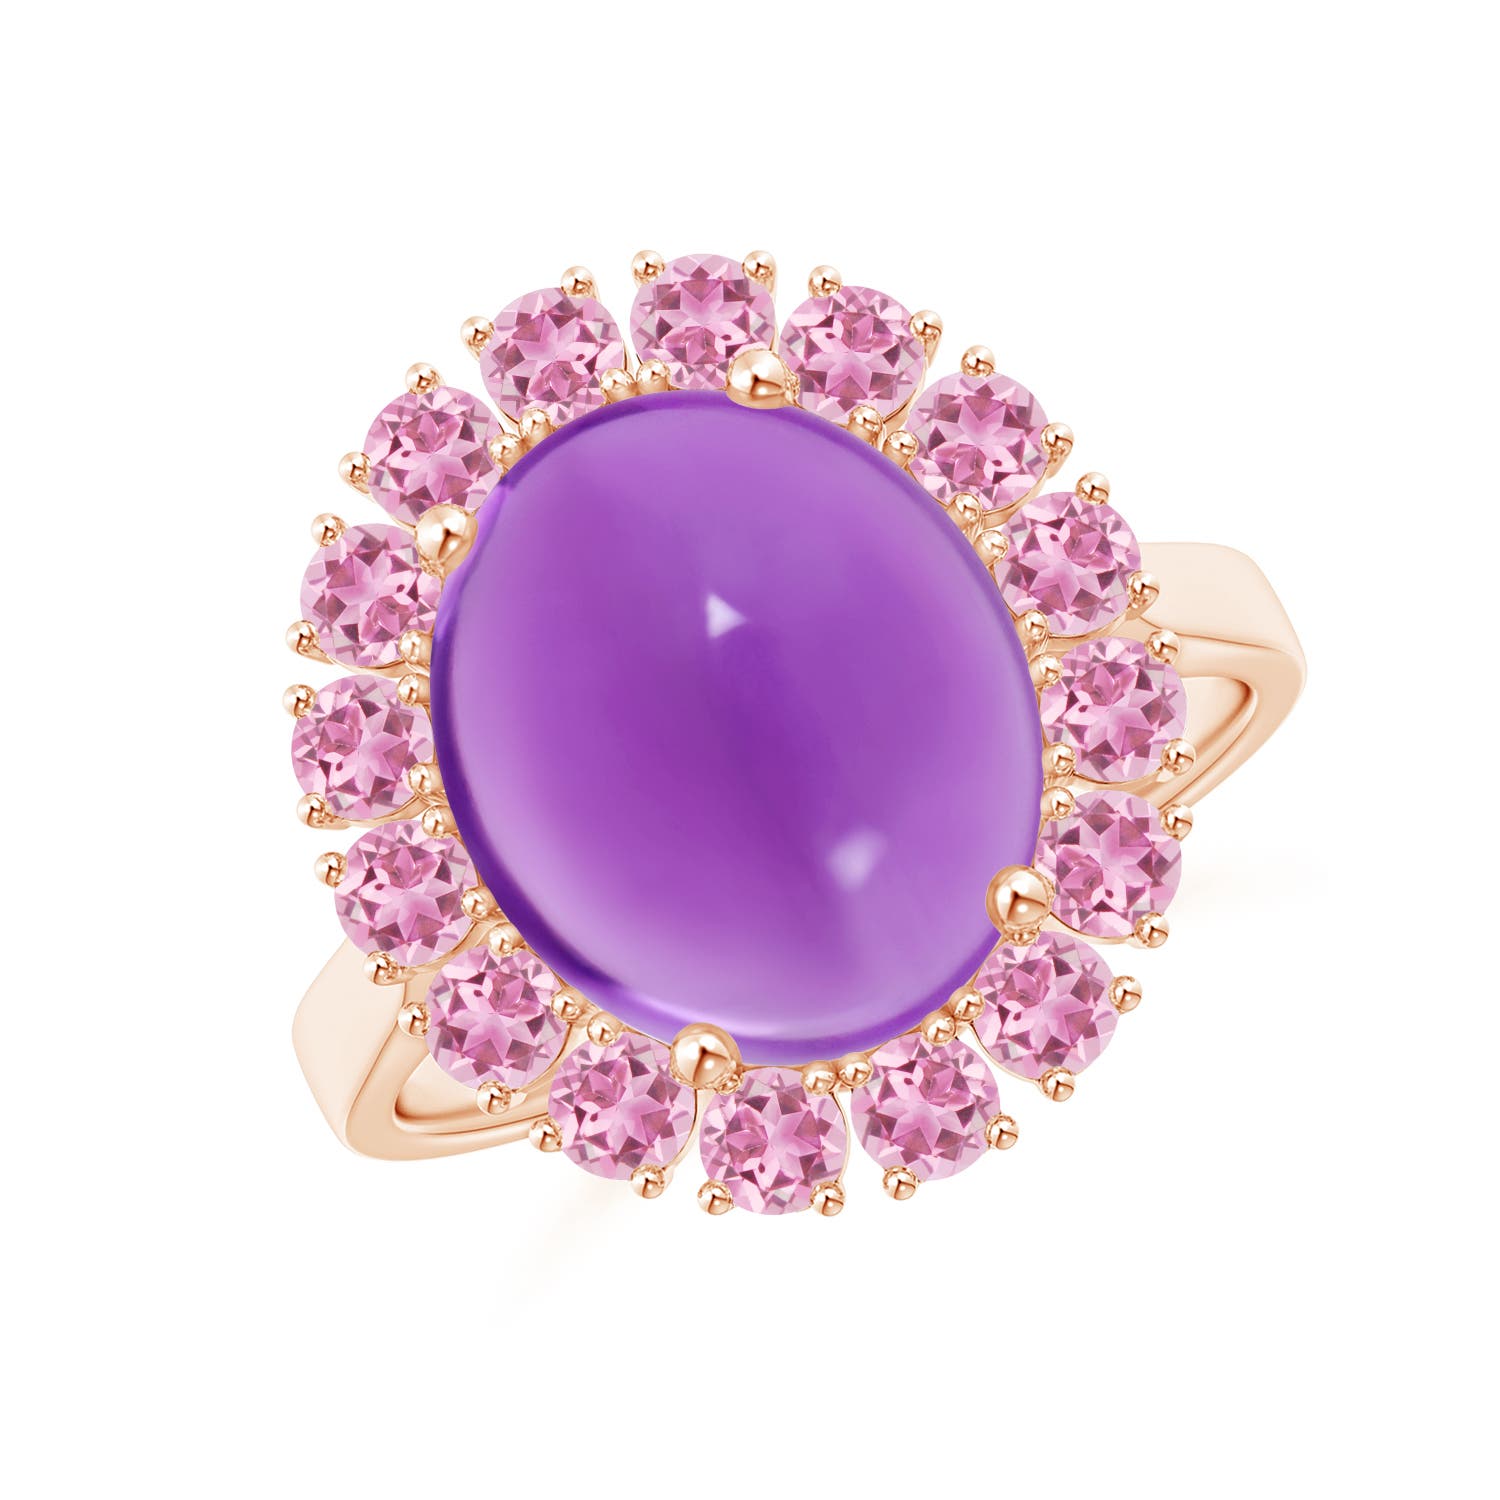 AA - Amethyst / 7.26 CT / 14 KT Rose Gold